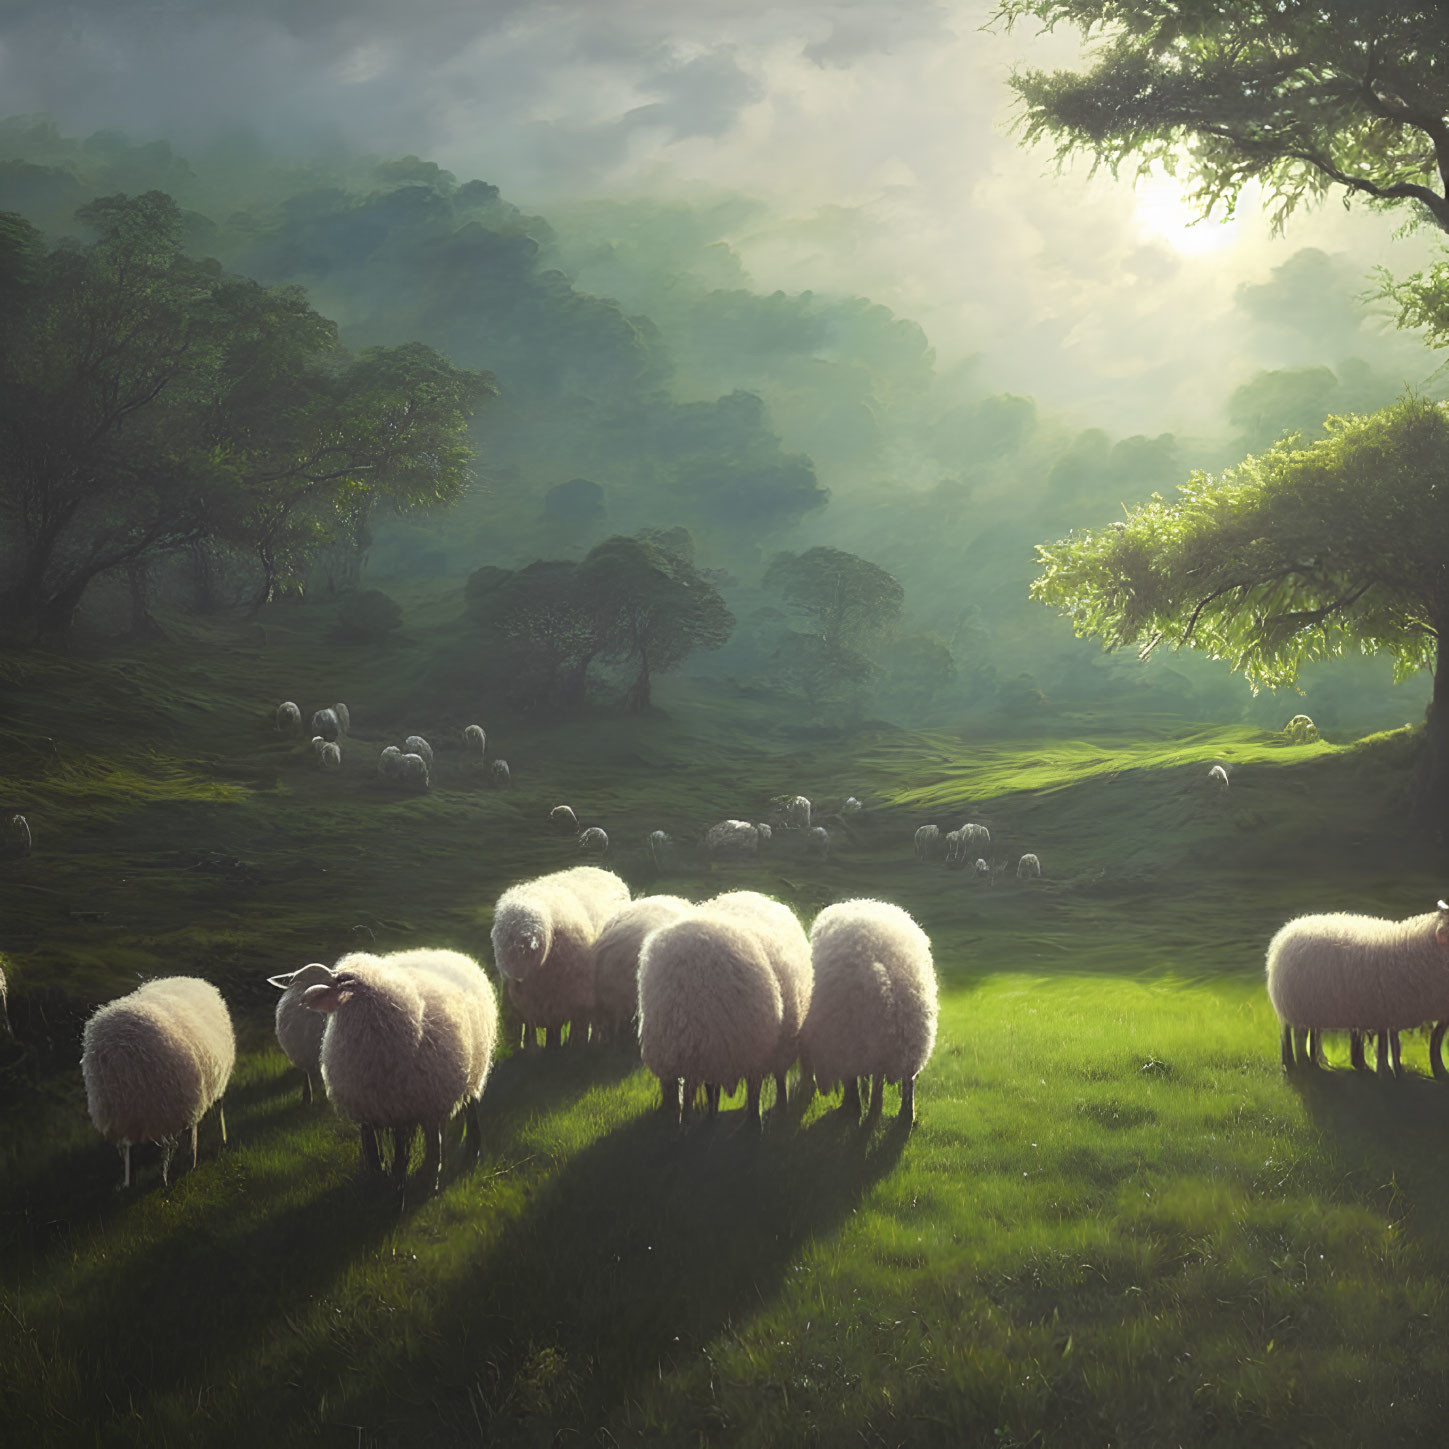 Tranquil landscape: Sheep grazing on lush green grass at sunrise